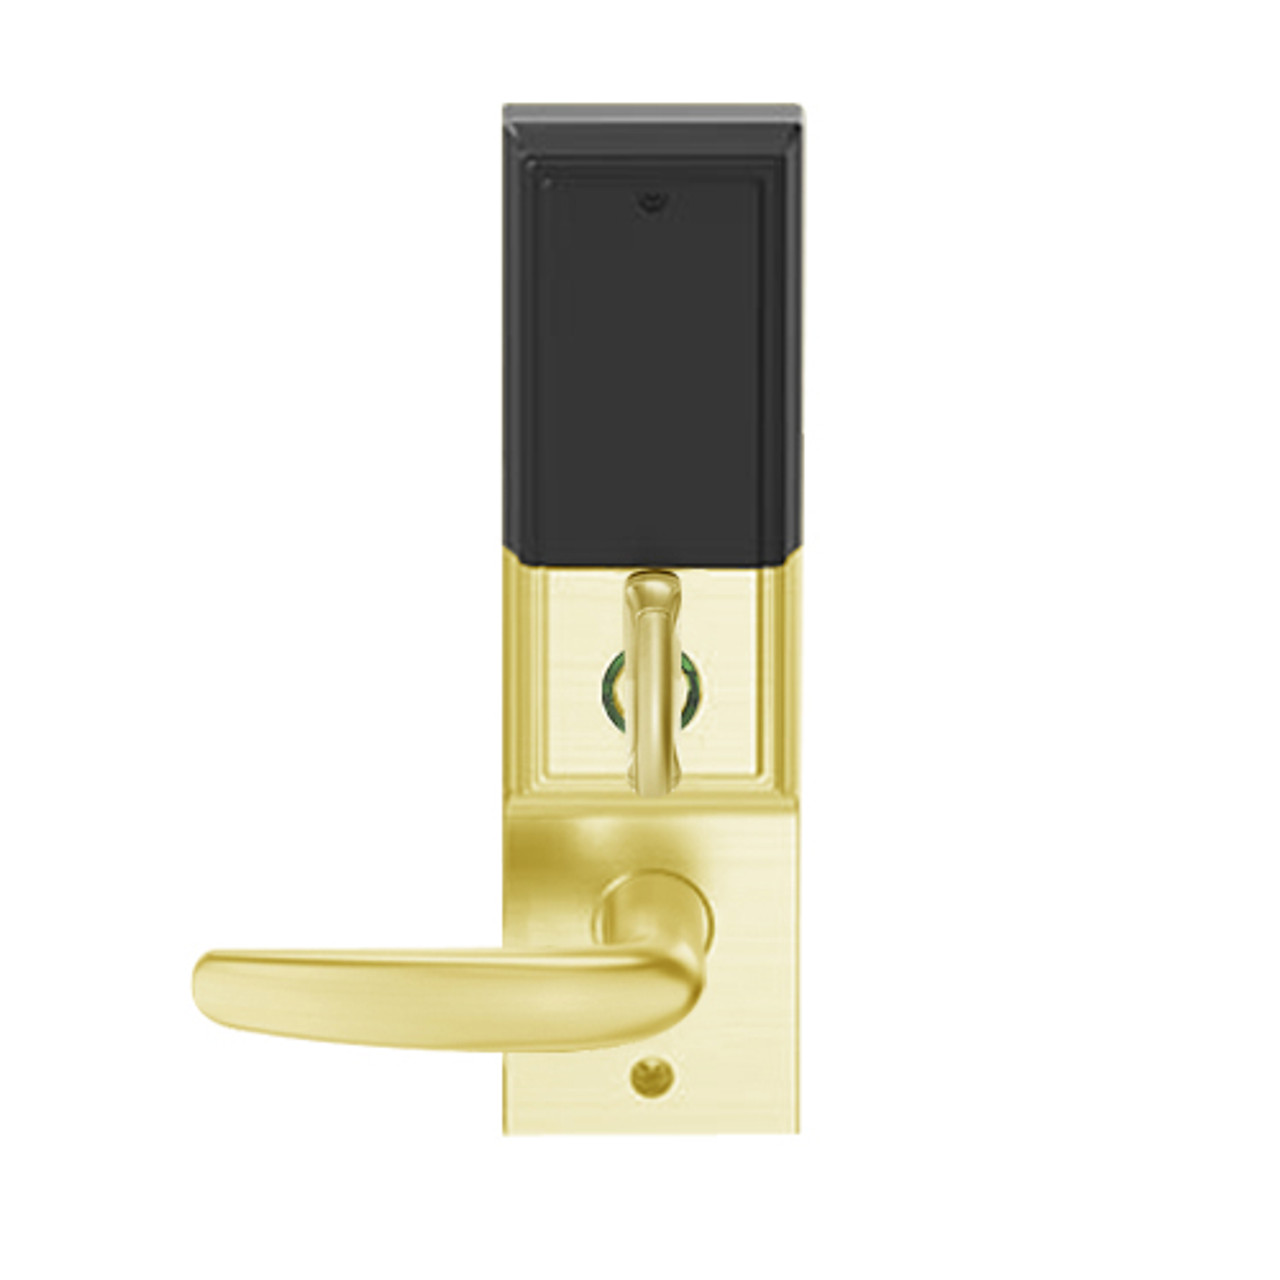 LEMD-ADD-P-07-605 Schlage Privacy/Apartment Wireless Addison Mortise Deadbolt Lock with LED and Athens Lever in Bright Brass